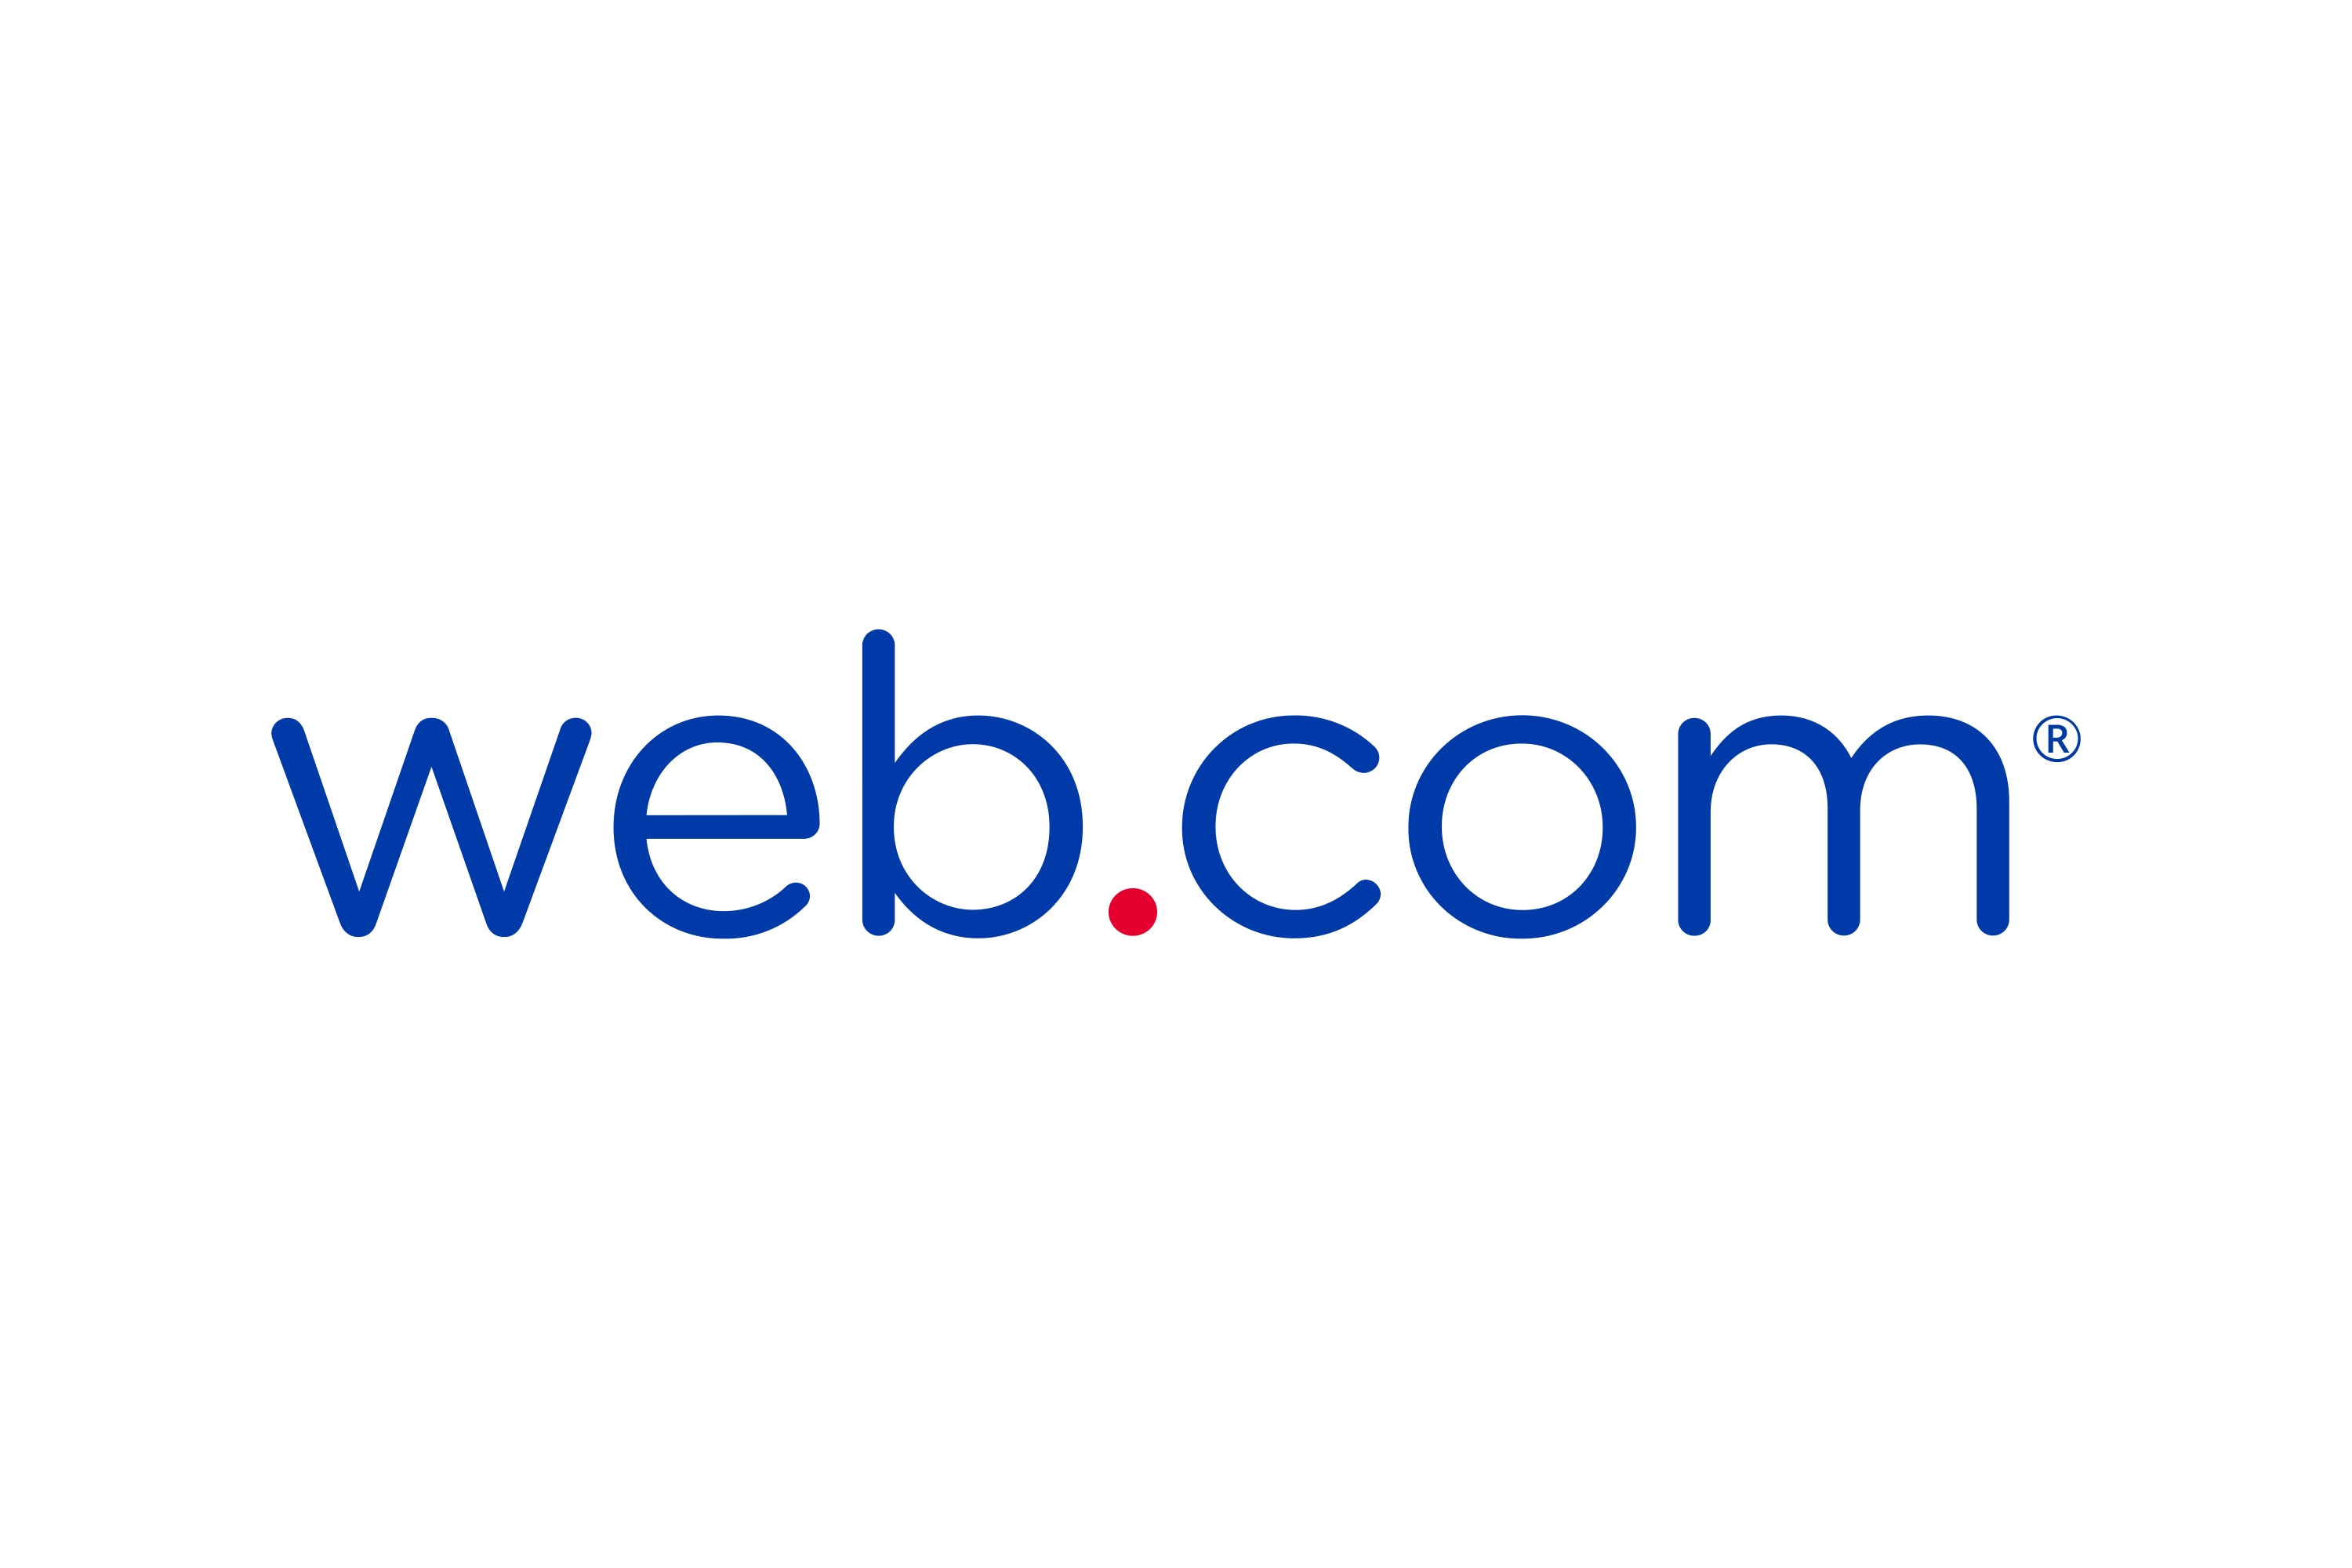 Web.com Review (Features, Services, Pros & Cons in 2021)